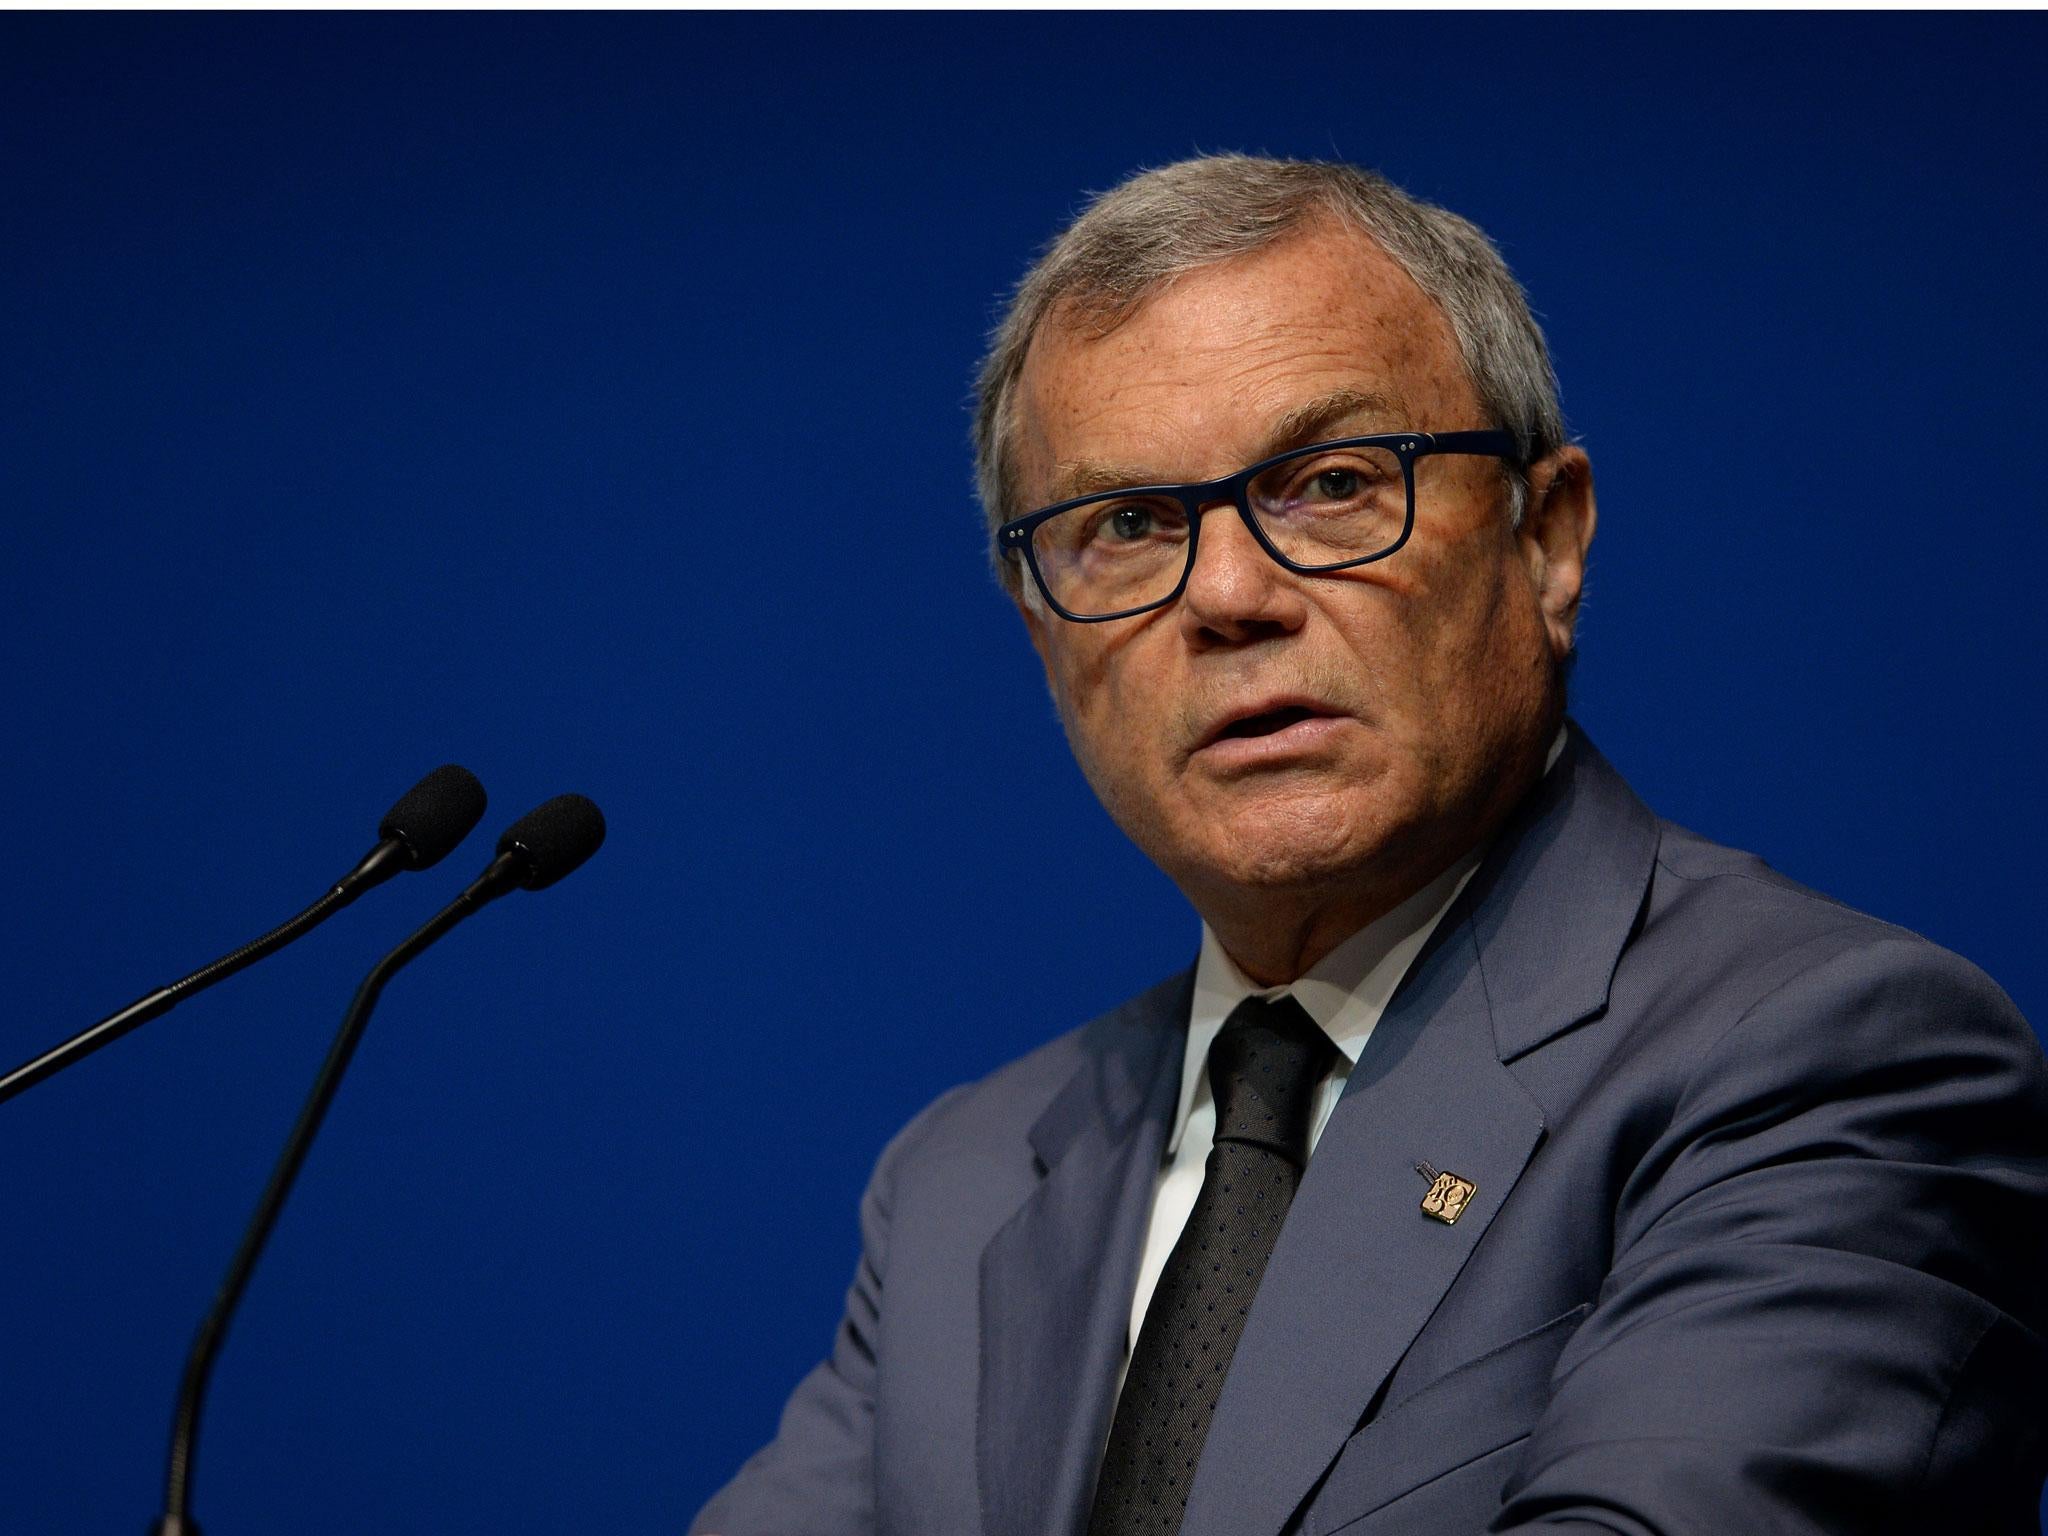 Sorrell argued that his remuneration was only a reflection of WPP’s success